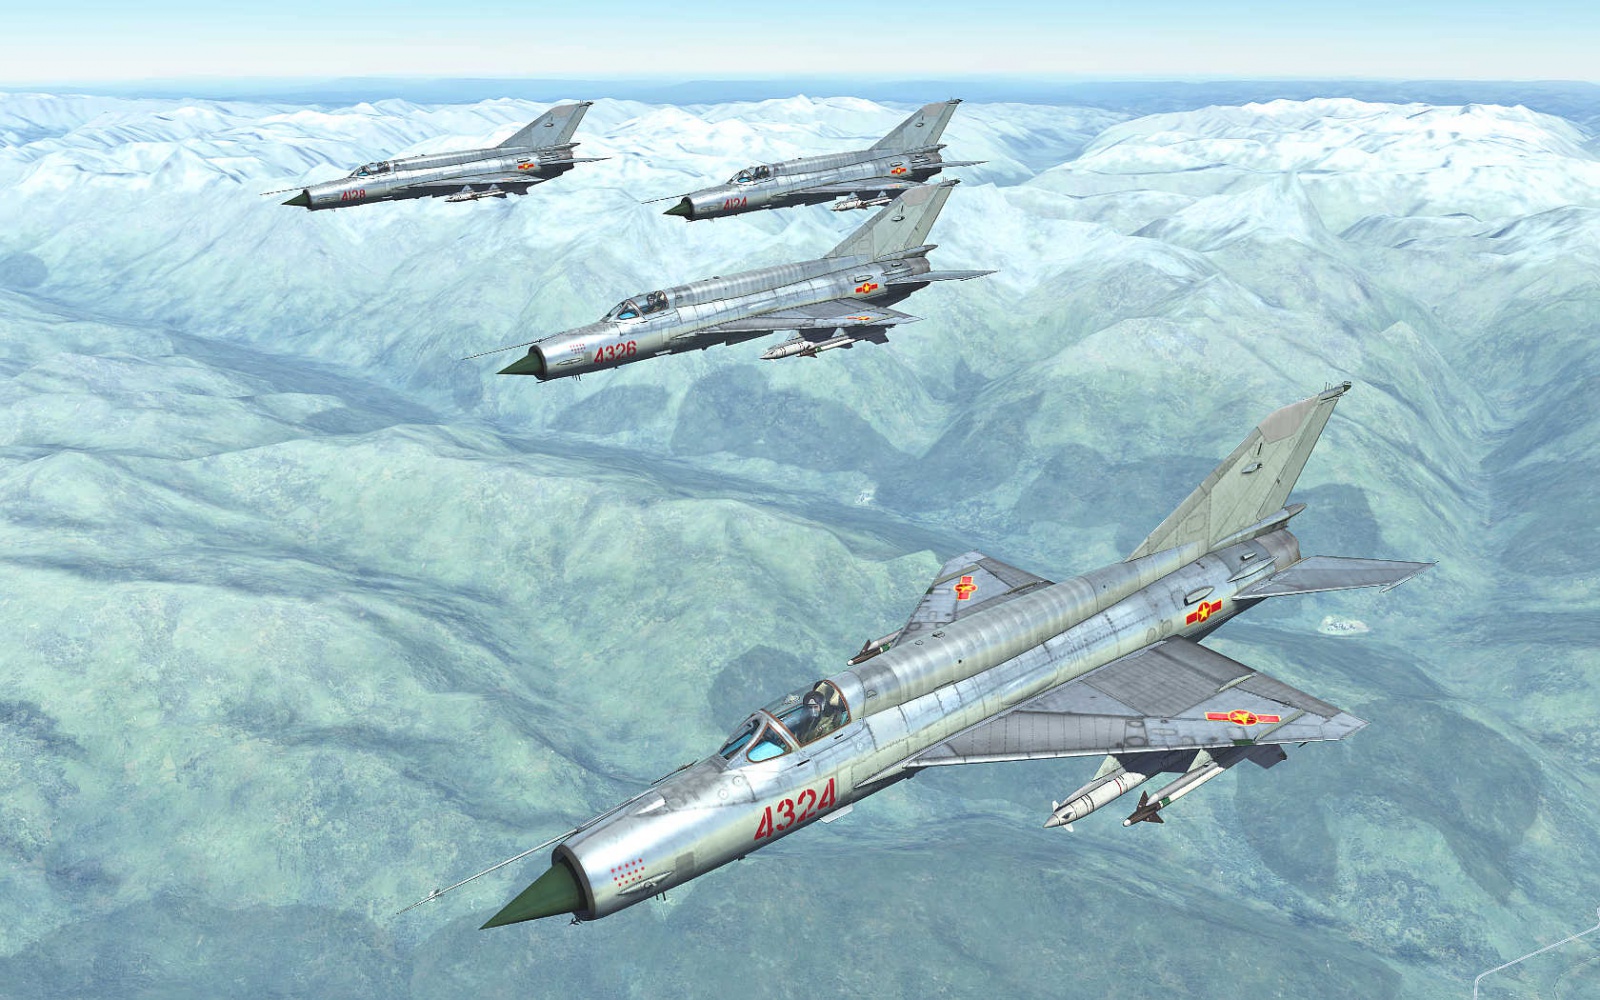 MiG-21 Fishbed: Can it Fly for 100 Years?.hoa - LifeAnimal